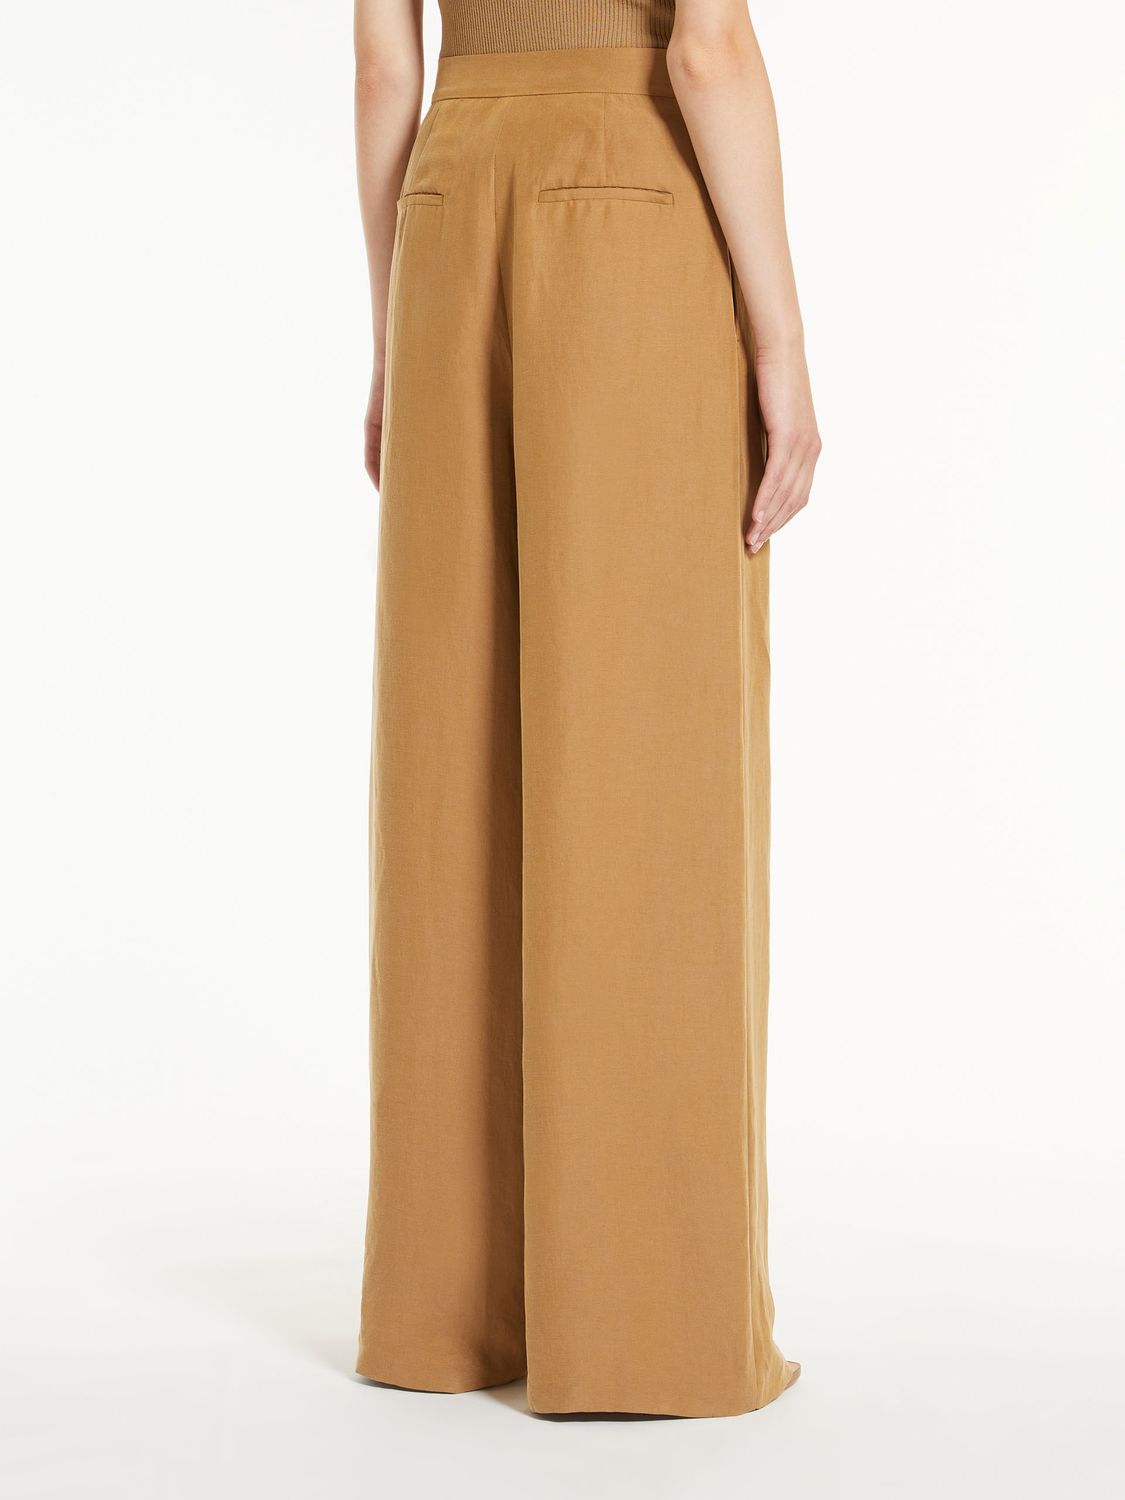 Women's Light and Airy Trousers - Linen and Silk Blend in Neutral Arena Shade